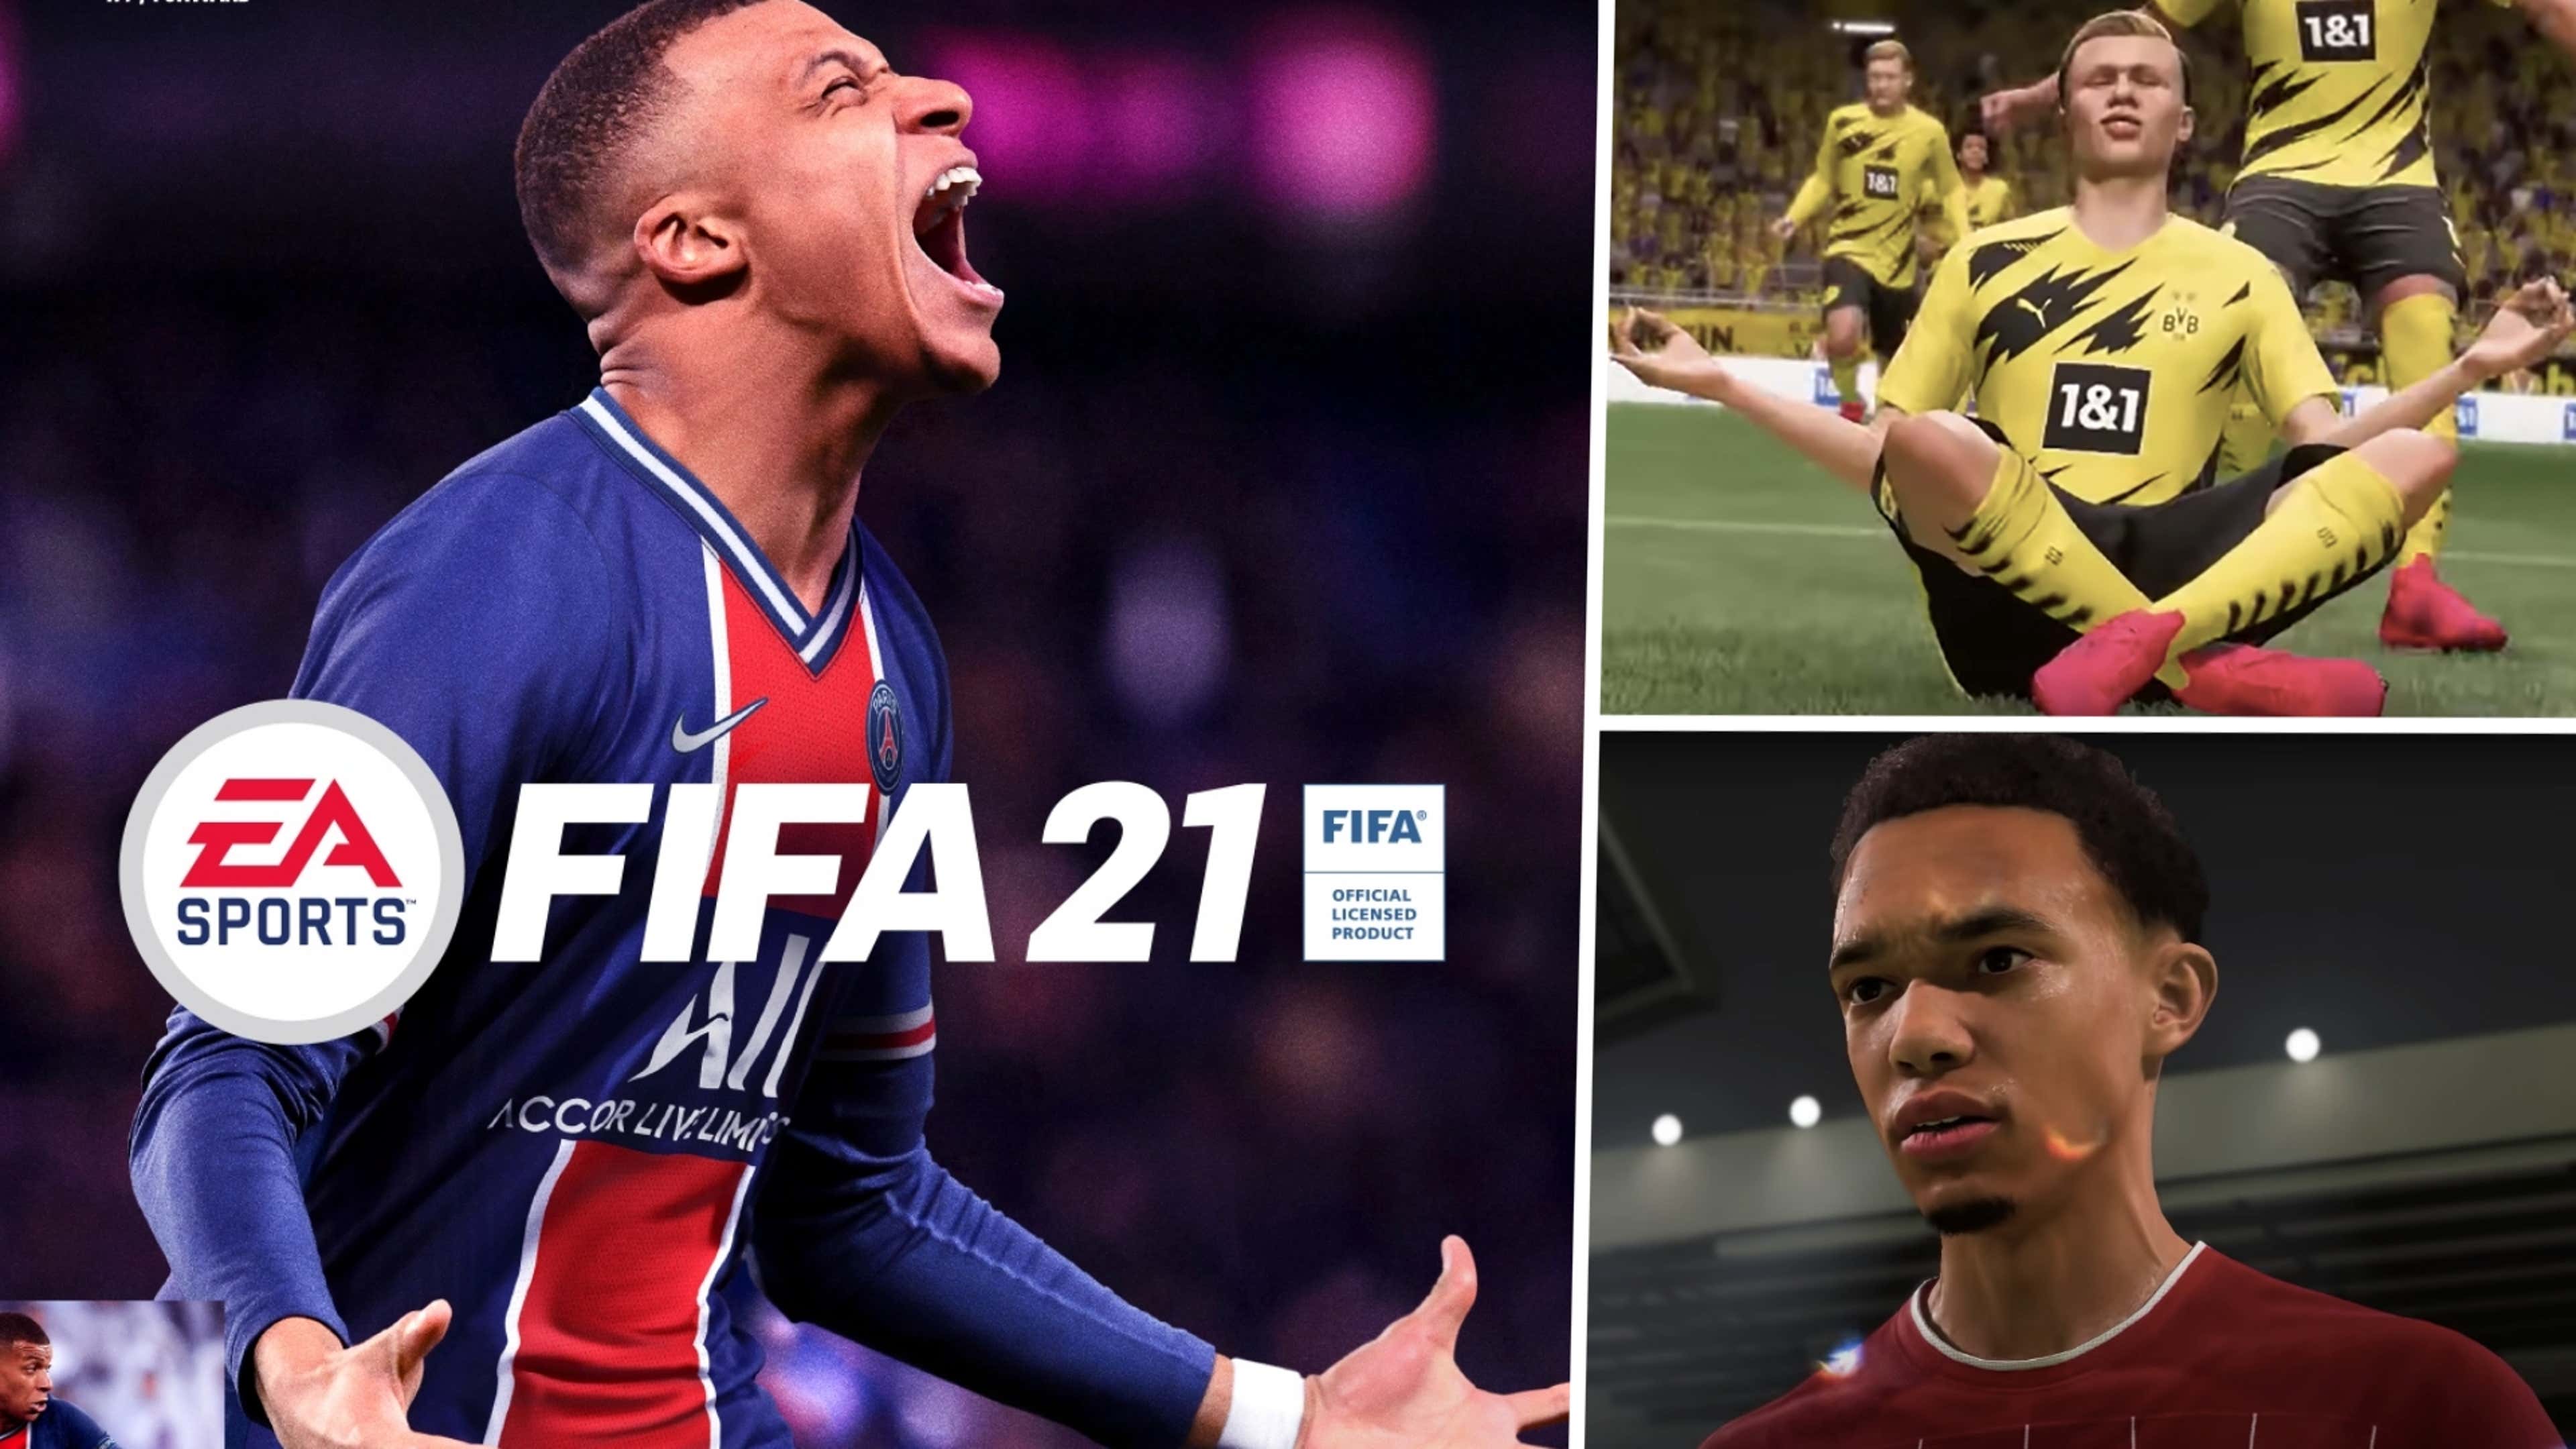 I Ranked All 21 Games from EA Sports BIG! 